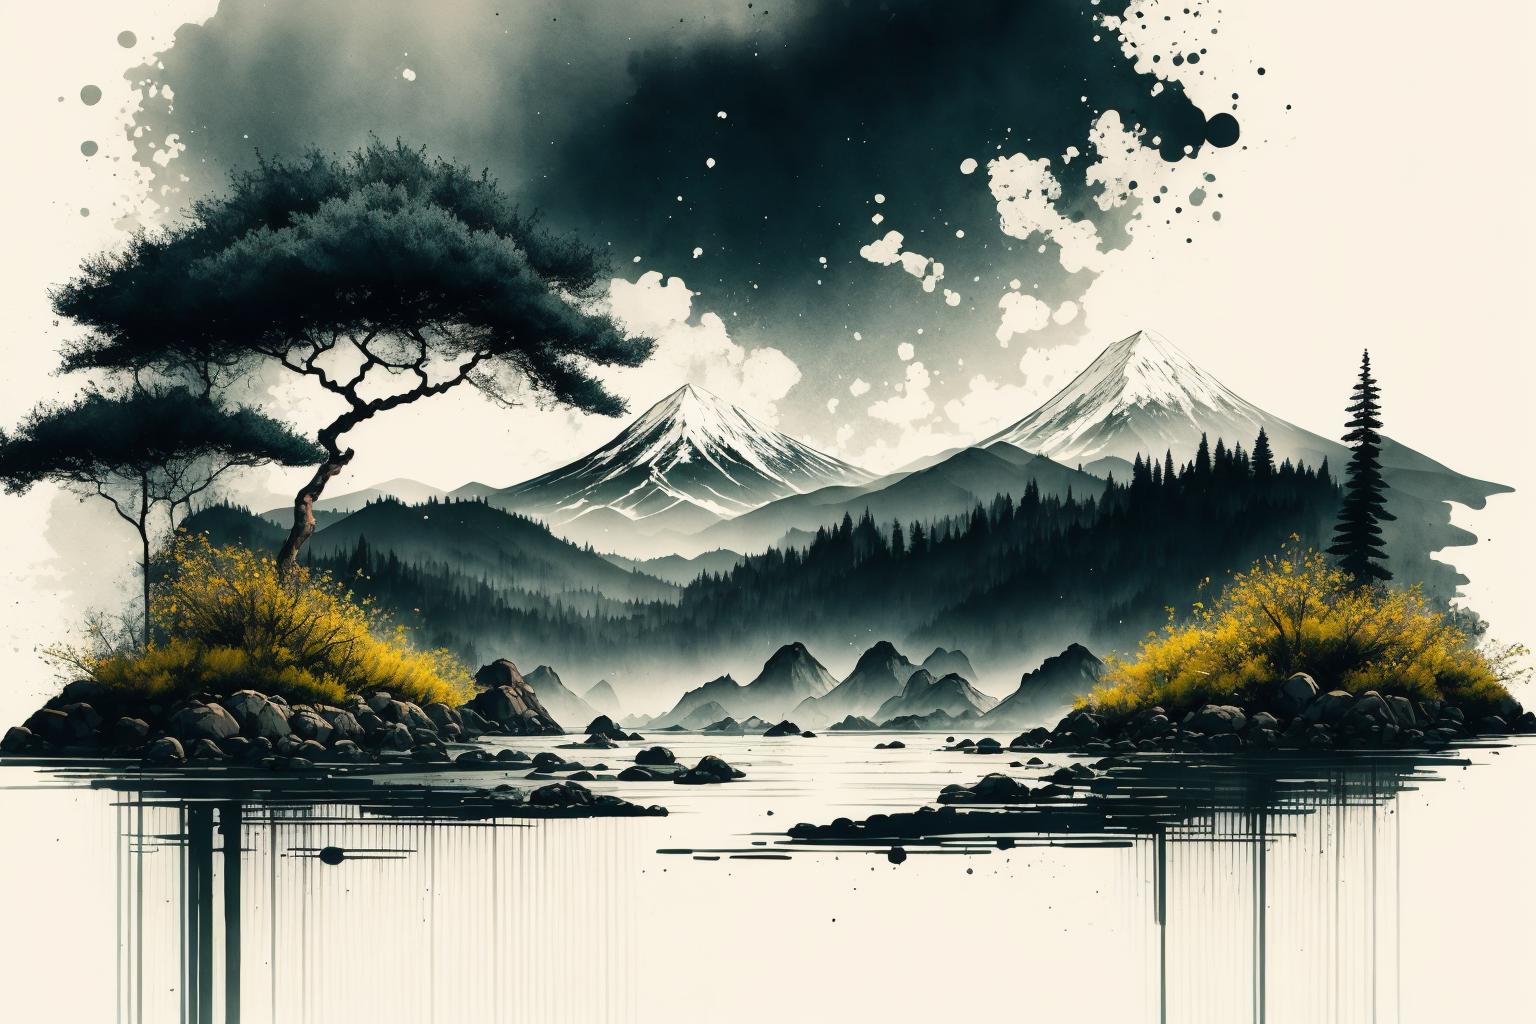 Ink scenery | 水墨山水 image by silvermoong